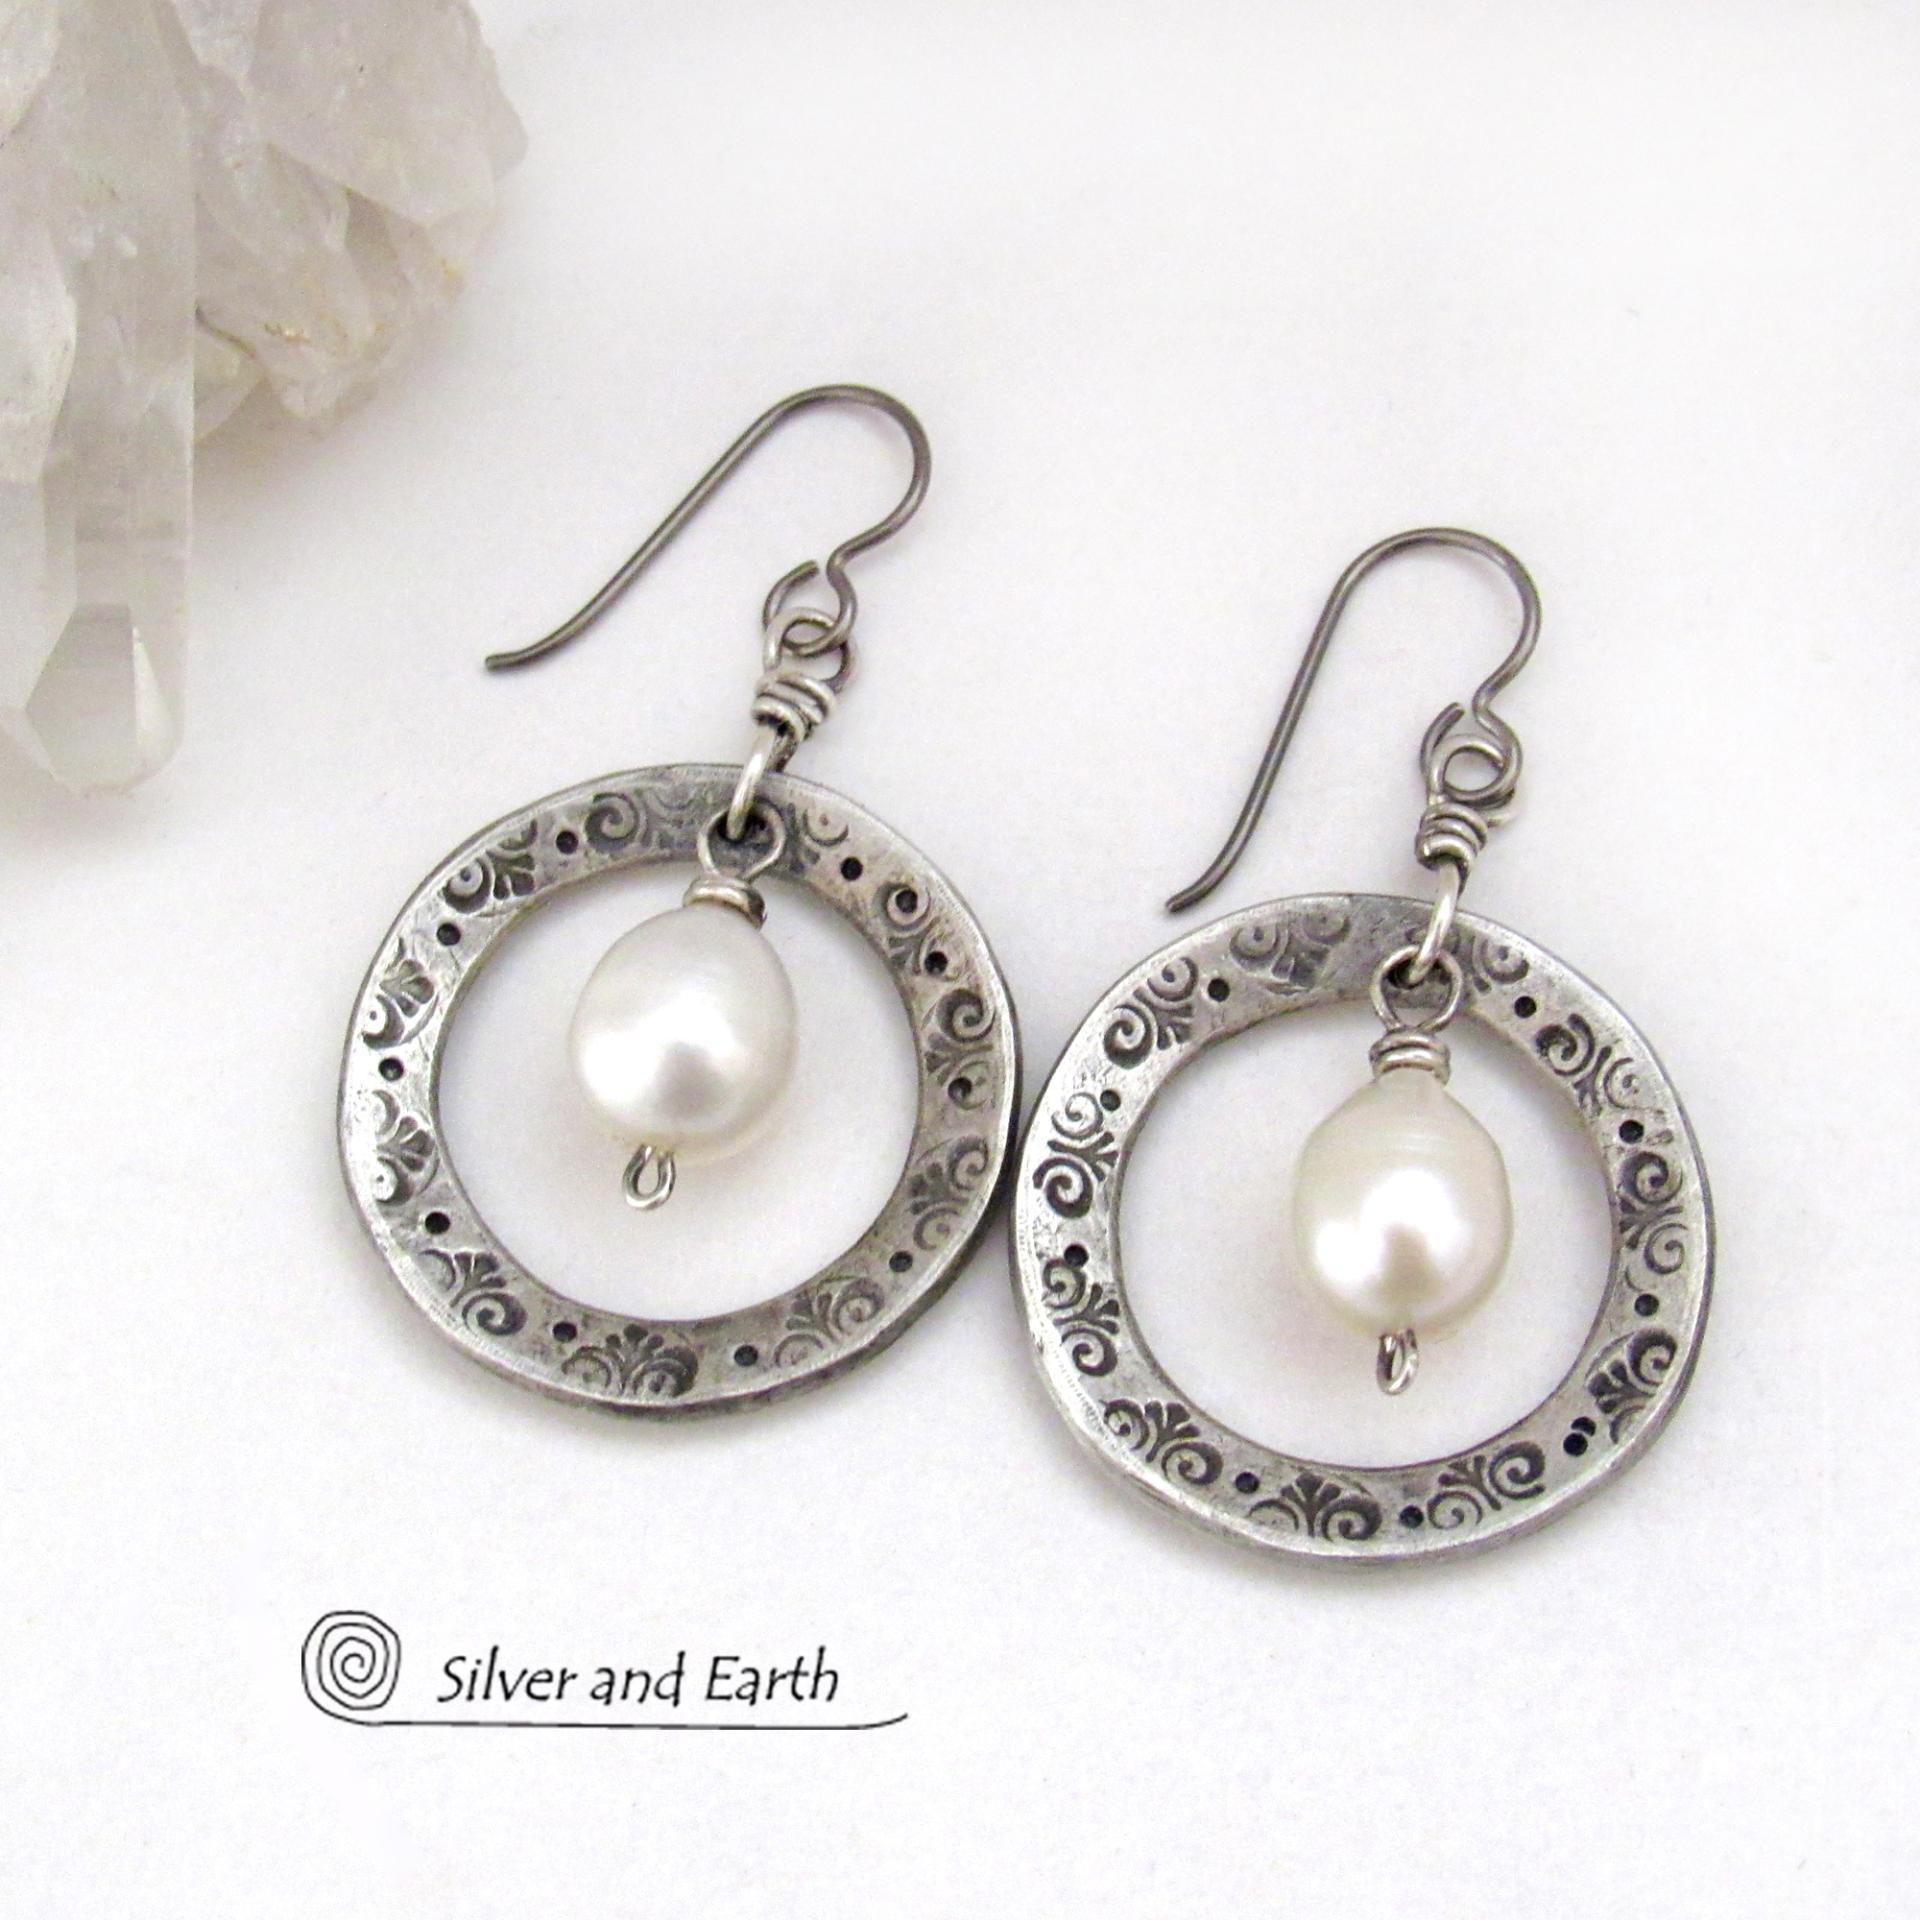 Hand Stamped Silver Pewter Circle Hoop Earrings with White Freshwater Pearls - Artisan Handcrafted Chic Modern Jewelry